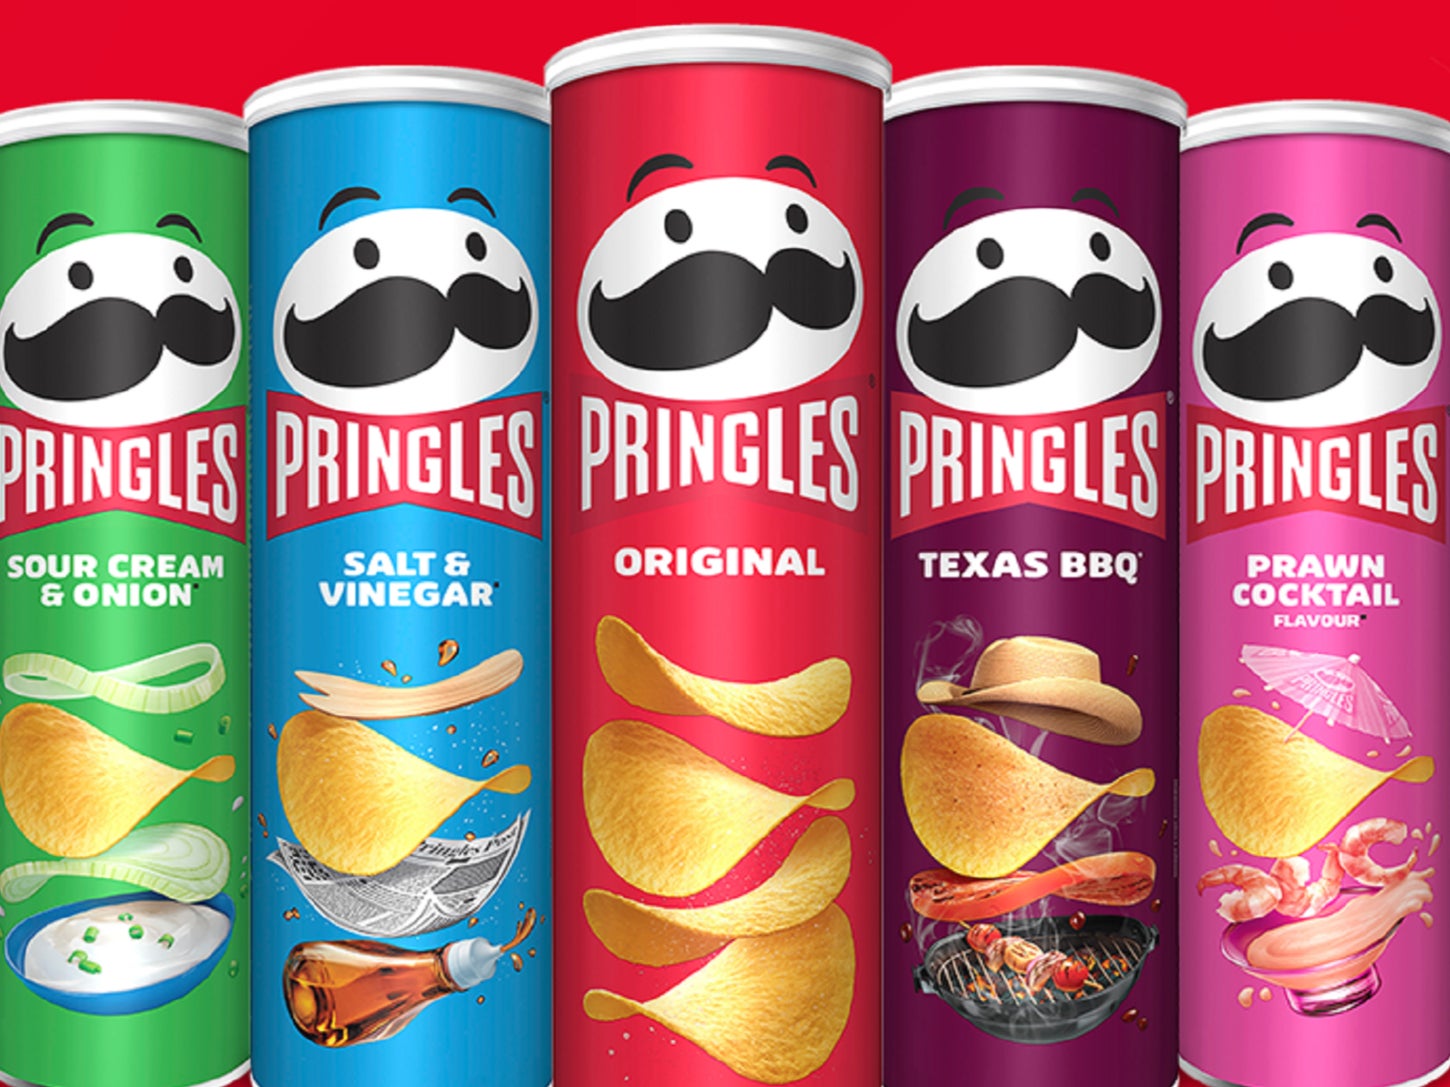 Pringles first rebrand in 20 years